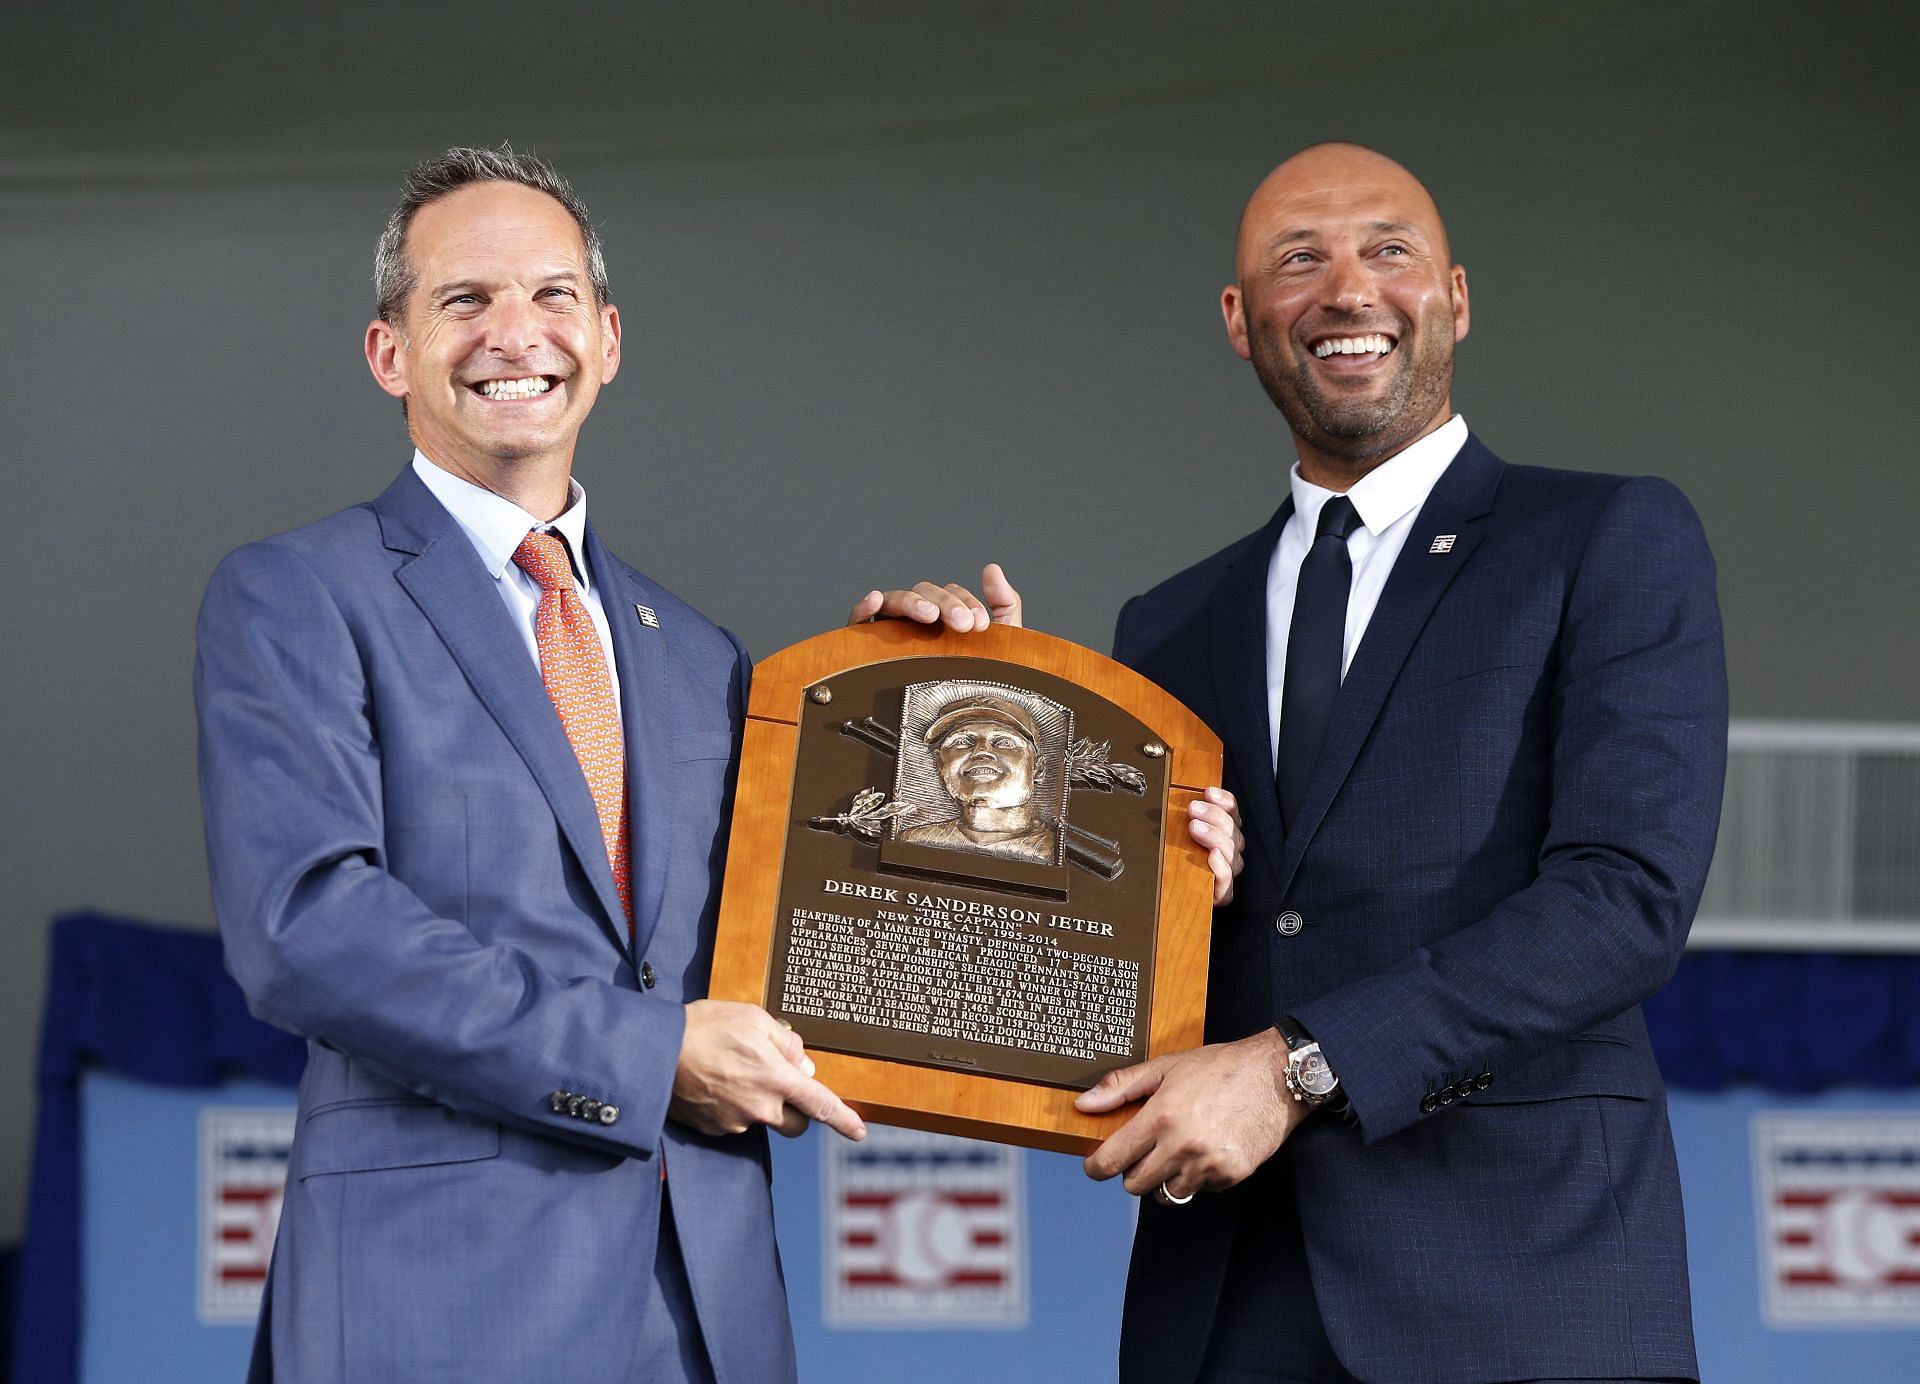 Derek Jeter: A Hall of Famer in both name and game